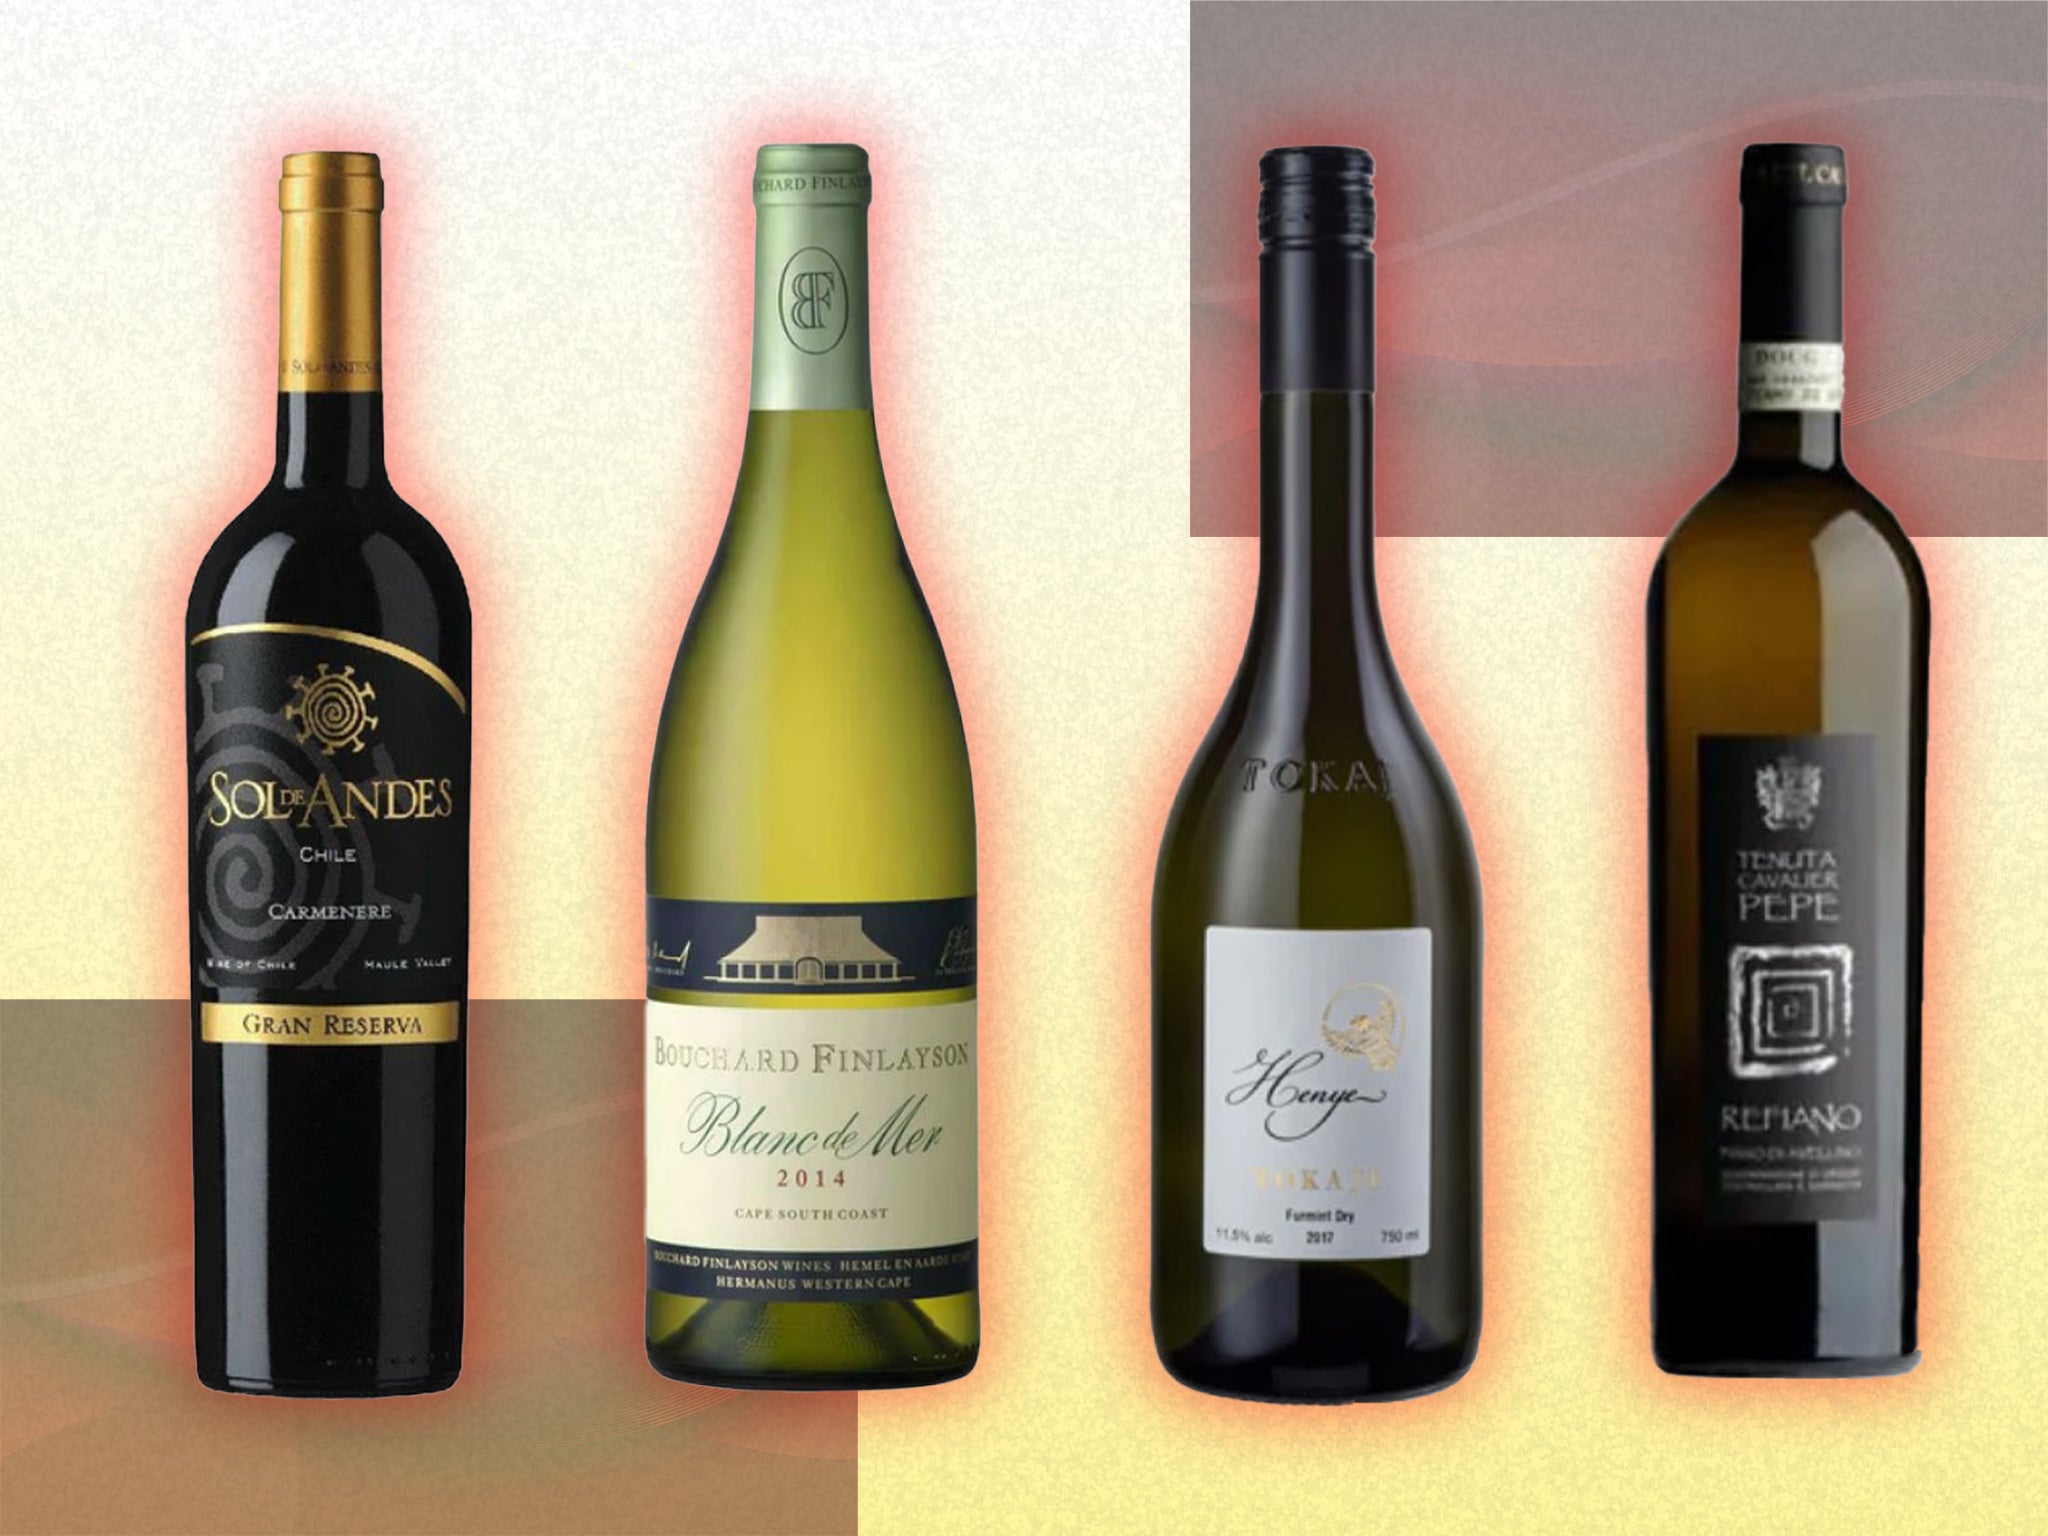 6 bottles of wine from around the world to inspire your travels